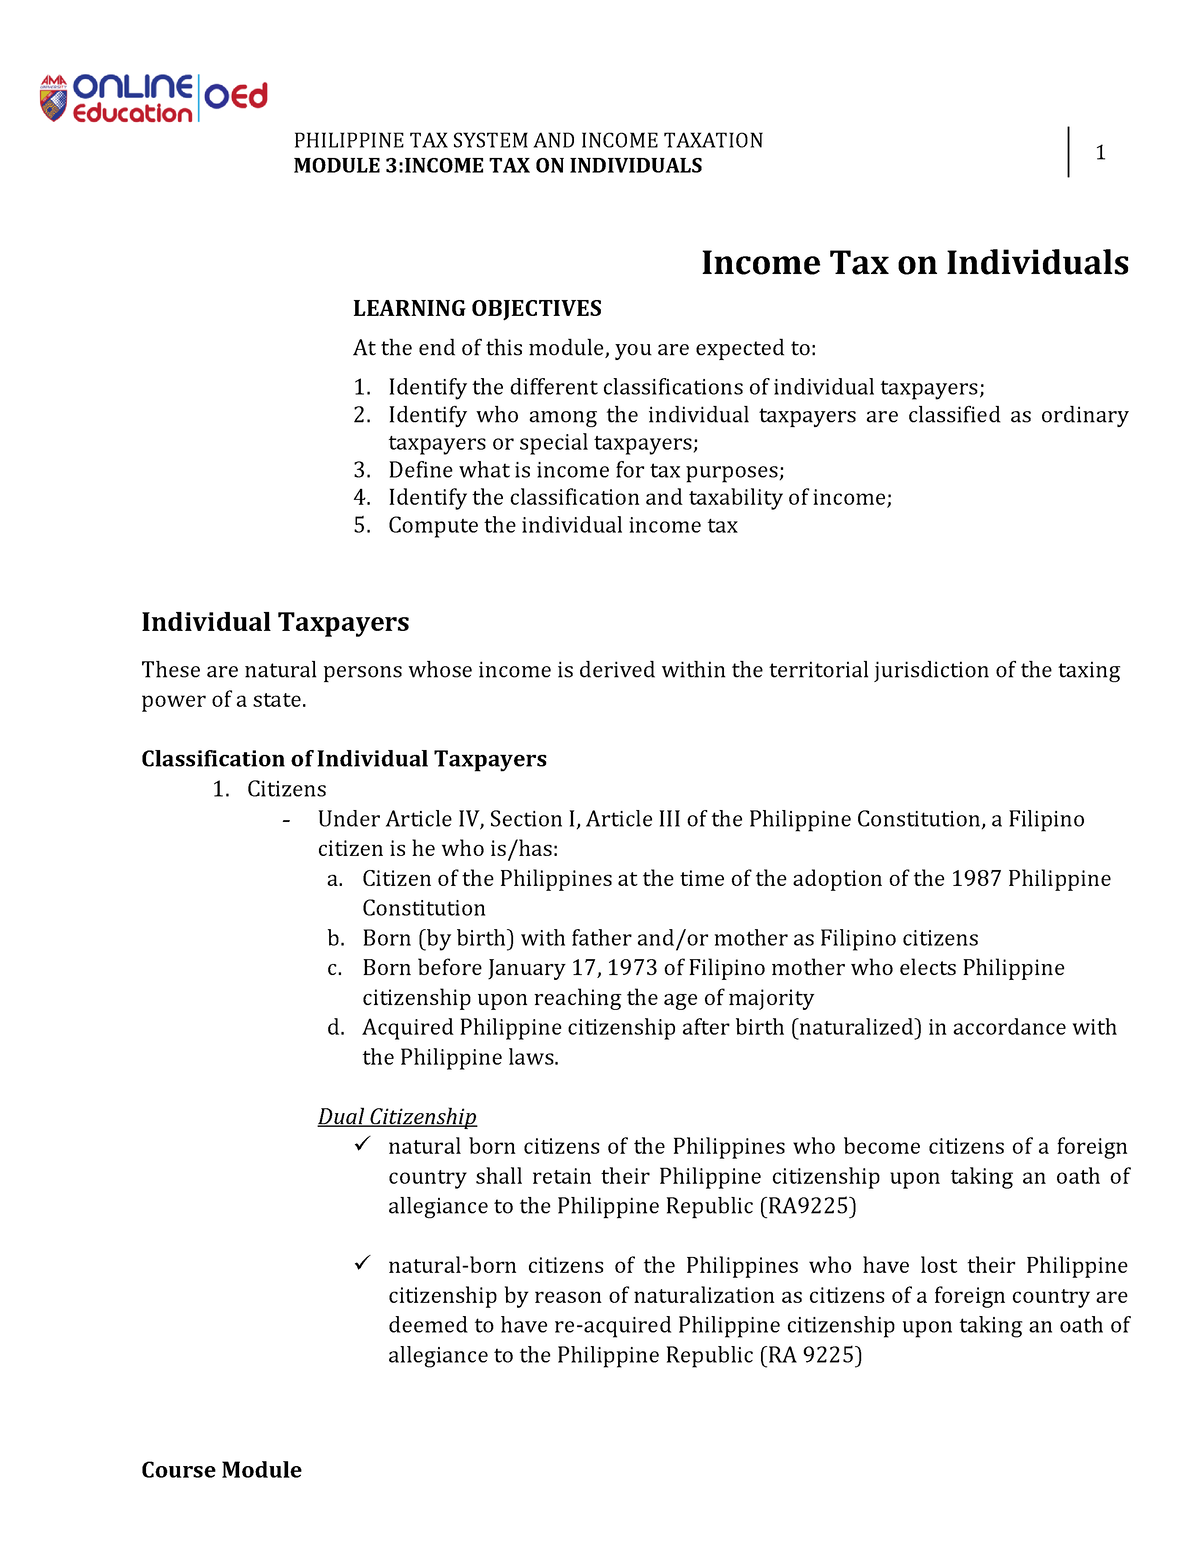 03-income-tax-on-individuals-module-3-income-tax-on-individuals-1